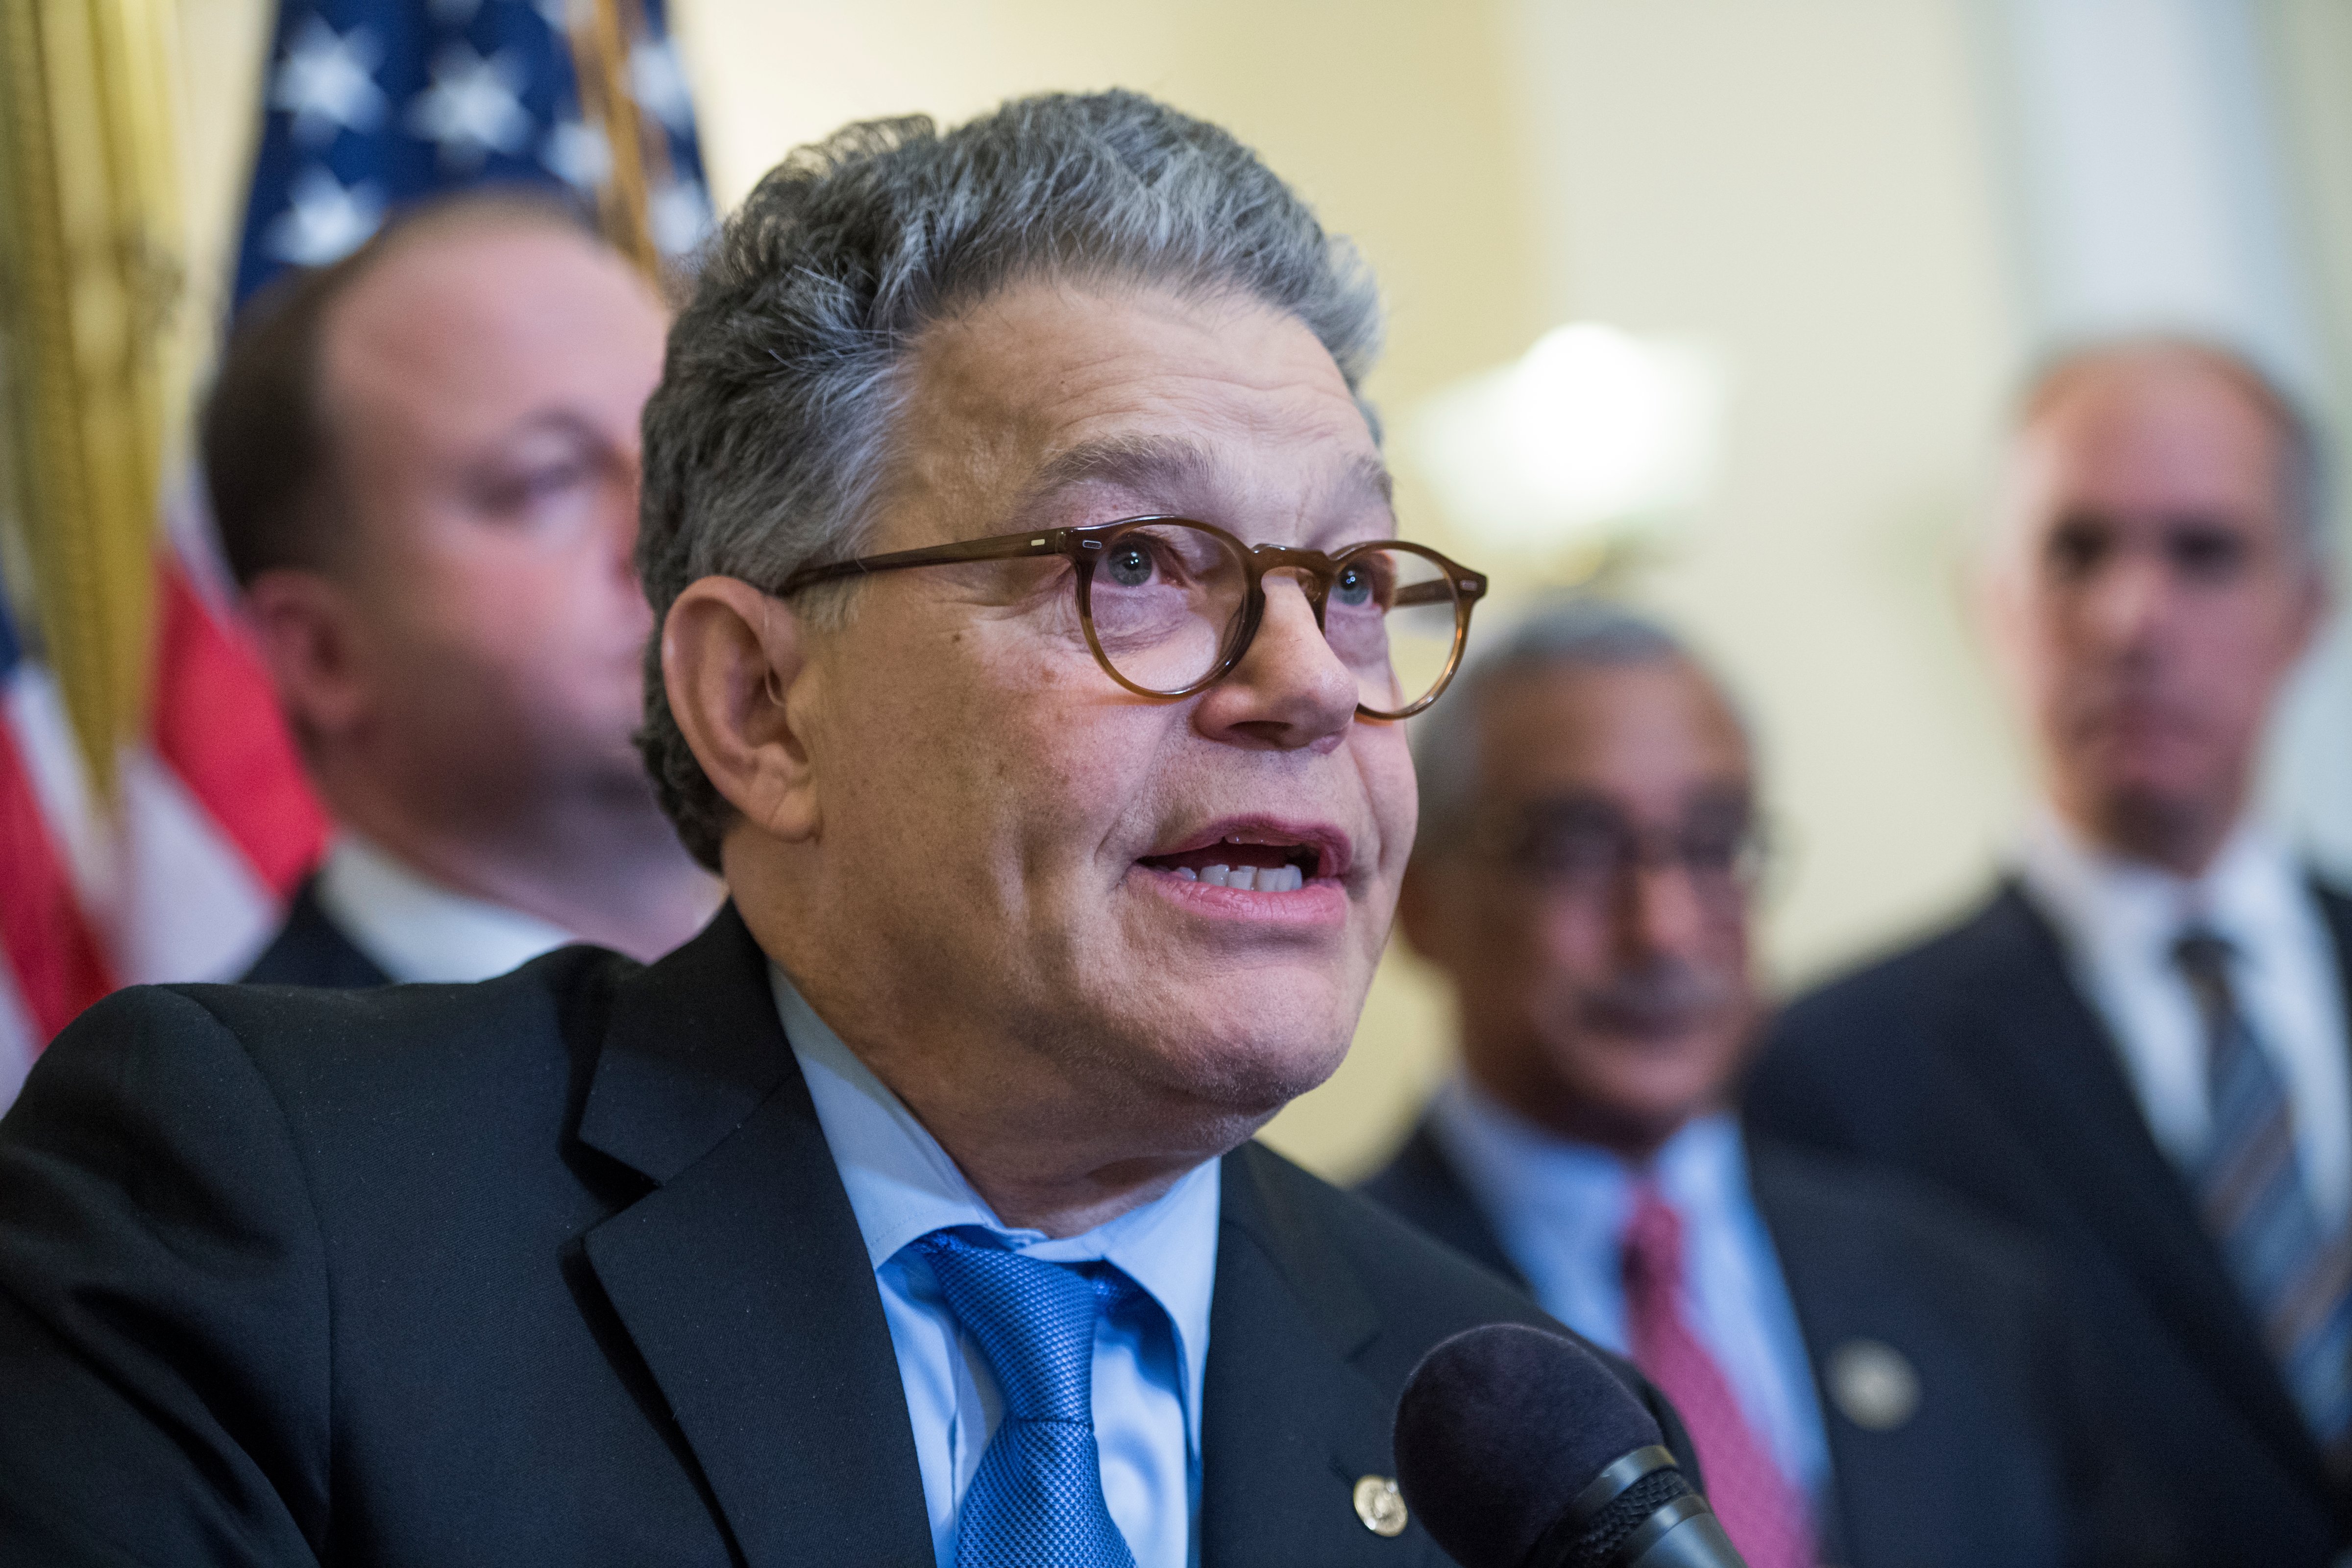 Sen. Al Franken, D-Minn., attends a news conference in the Capitol on the Child Care for Working Families Act, which focuses on affordable early learning and care on September 14, 2017. (Tom Williams&mdash;CQ-Roll Call,Inc./Getty Images)